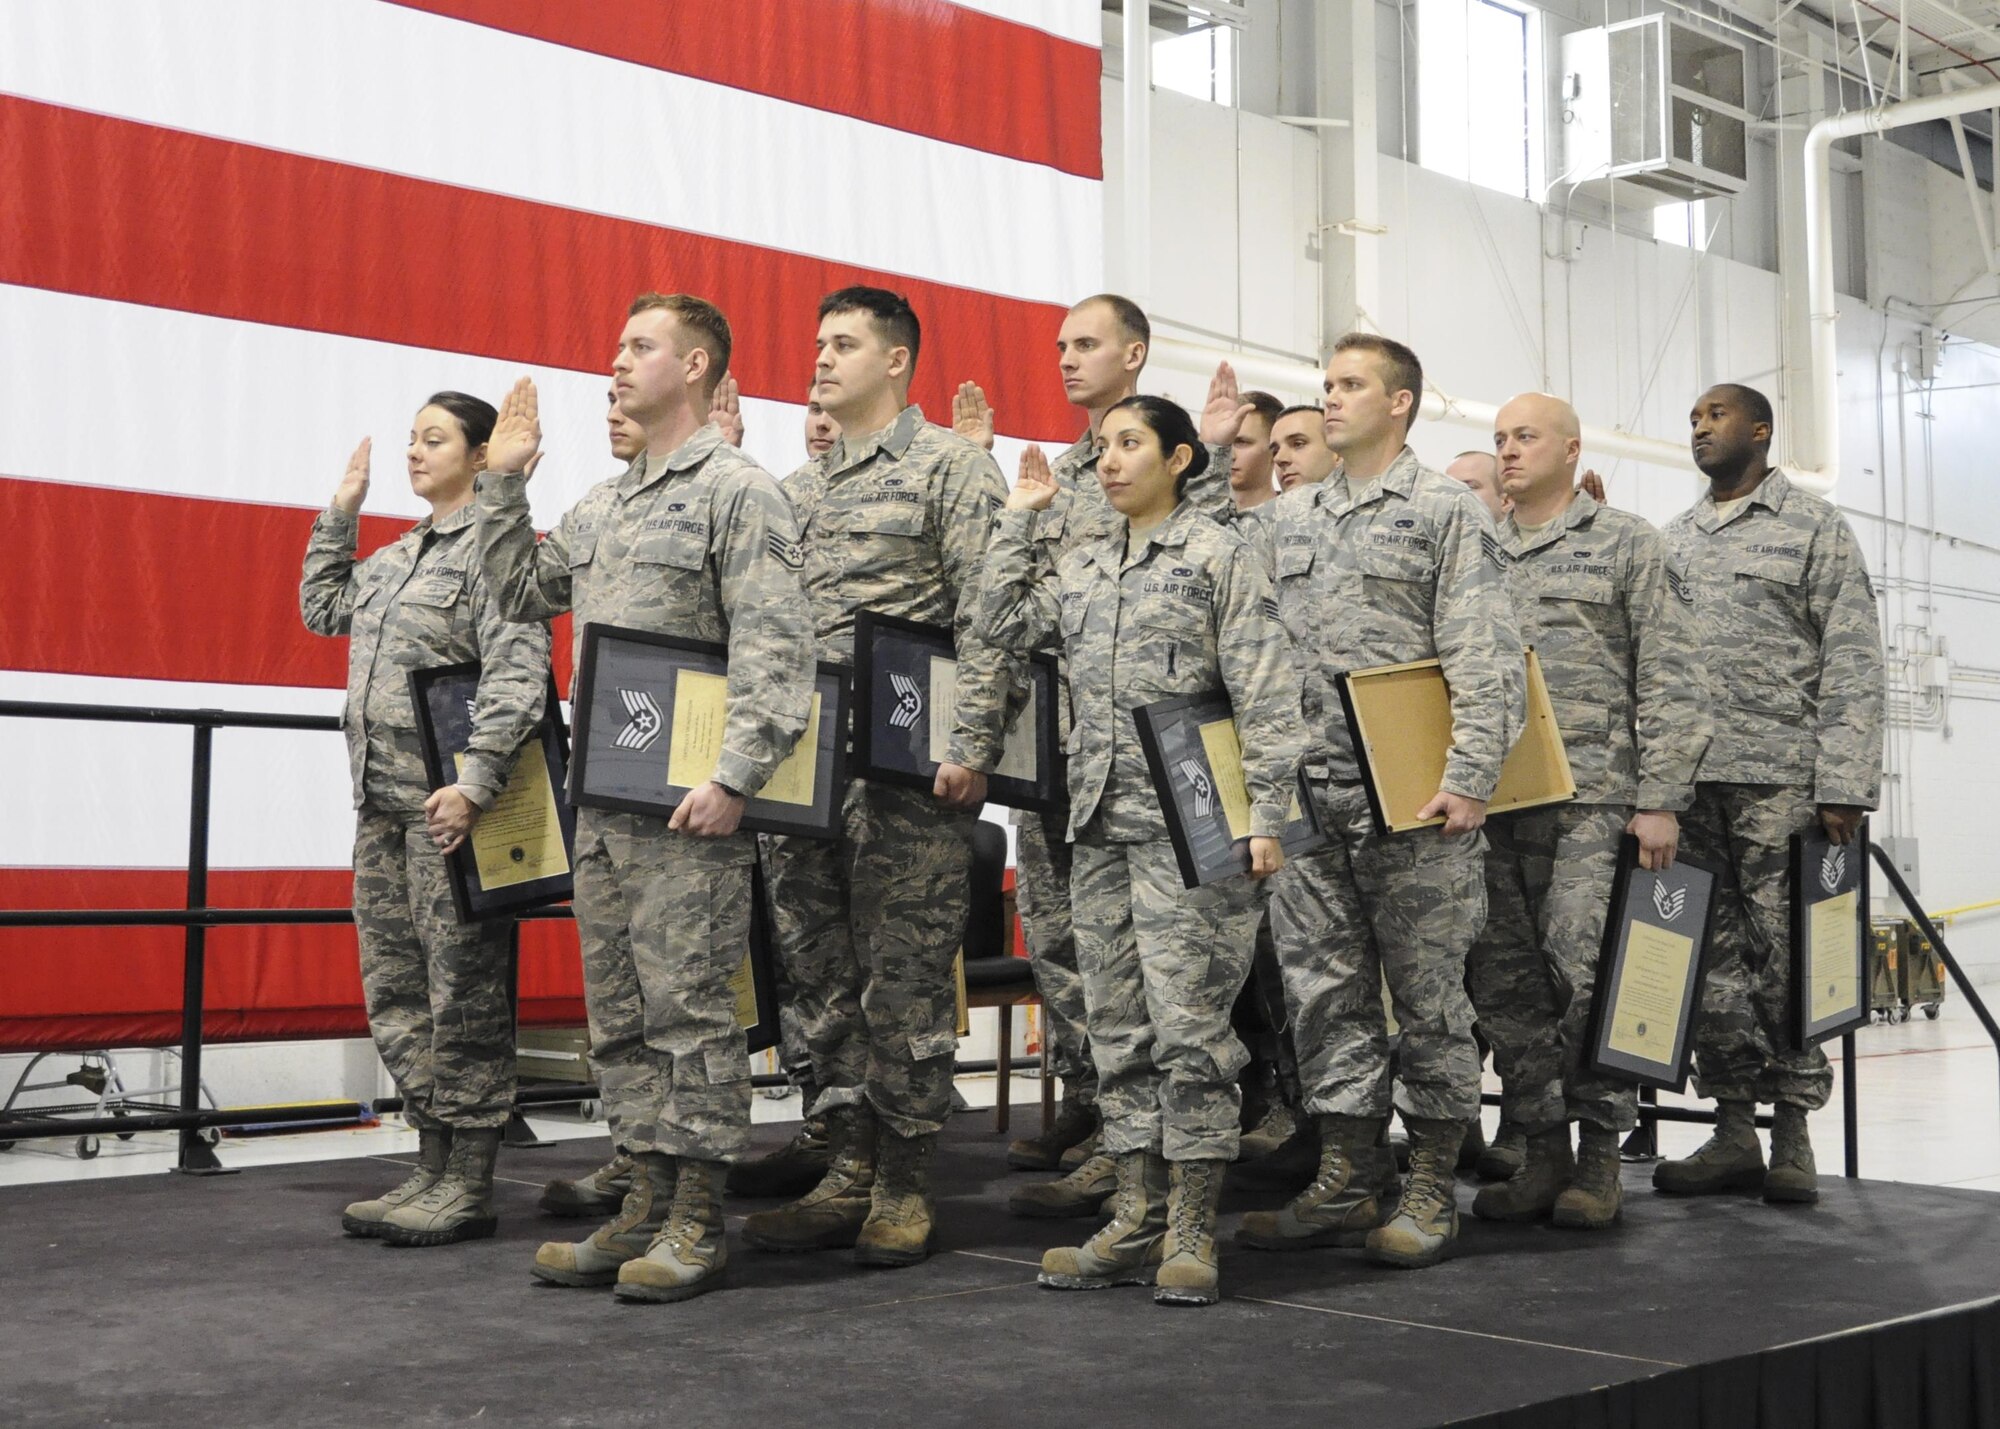 Inductees with the 442d Maintenance Group recite the non-commissioned officer creed during the NCO and Senior NCO induction ceremony at Whiteman Air Force Base, Missouri, Jan. 7, 2017. The ceremony is a tradition to congratulate Airmen in their new position while reminding SNCOs how far they've come and inspiring NCOs to continue developing their leadership abilities. (U.S. Air Force photo/Senior Airman Missy Sterling)